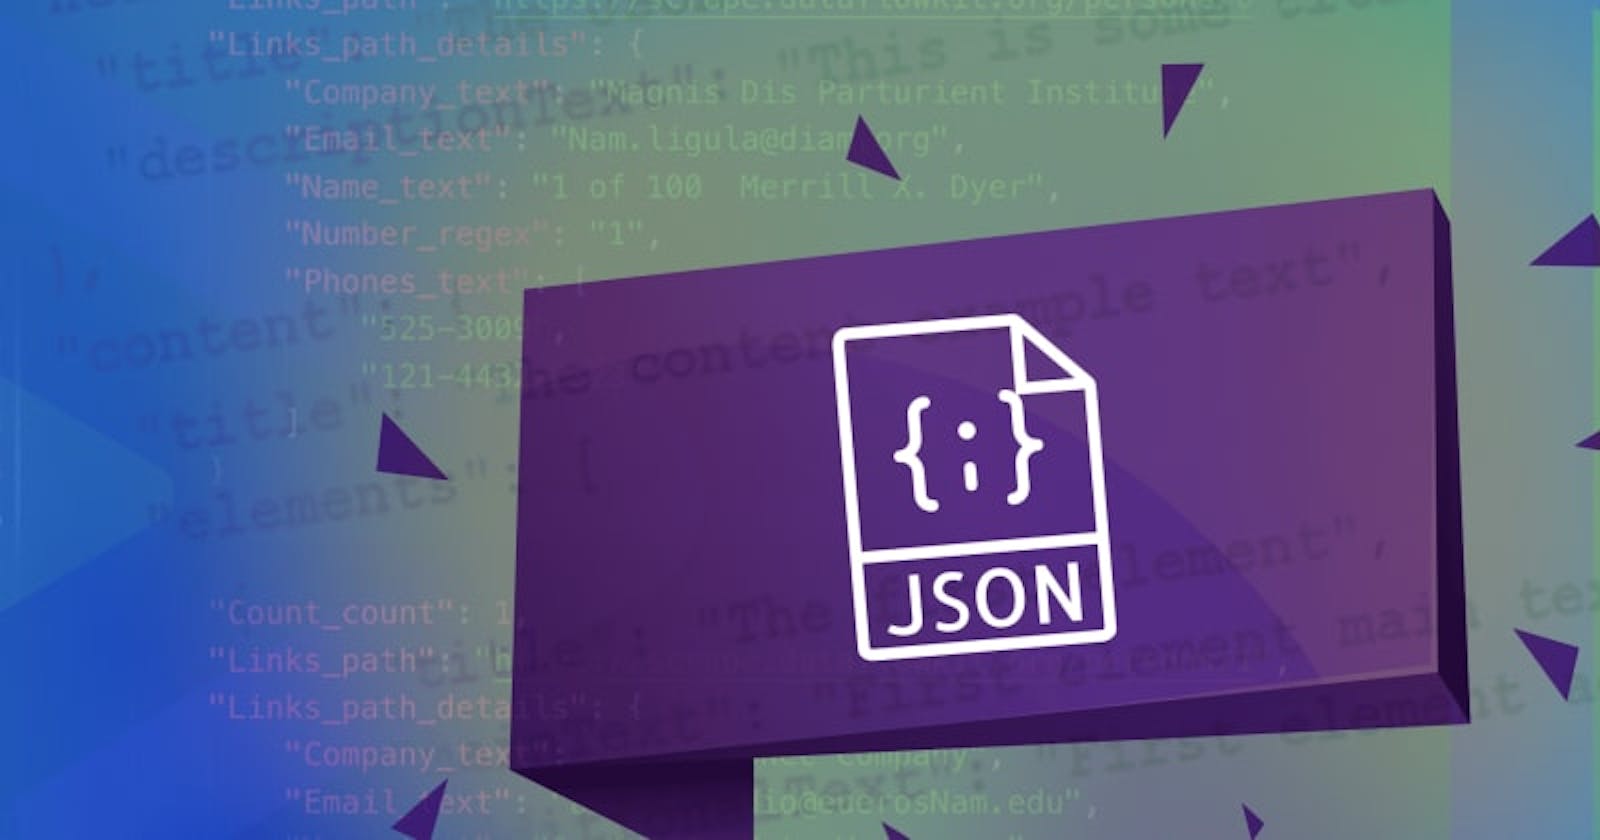 All about the JSON format